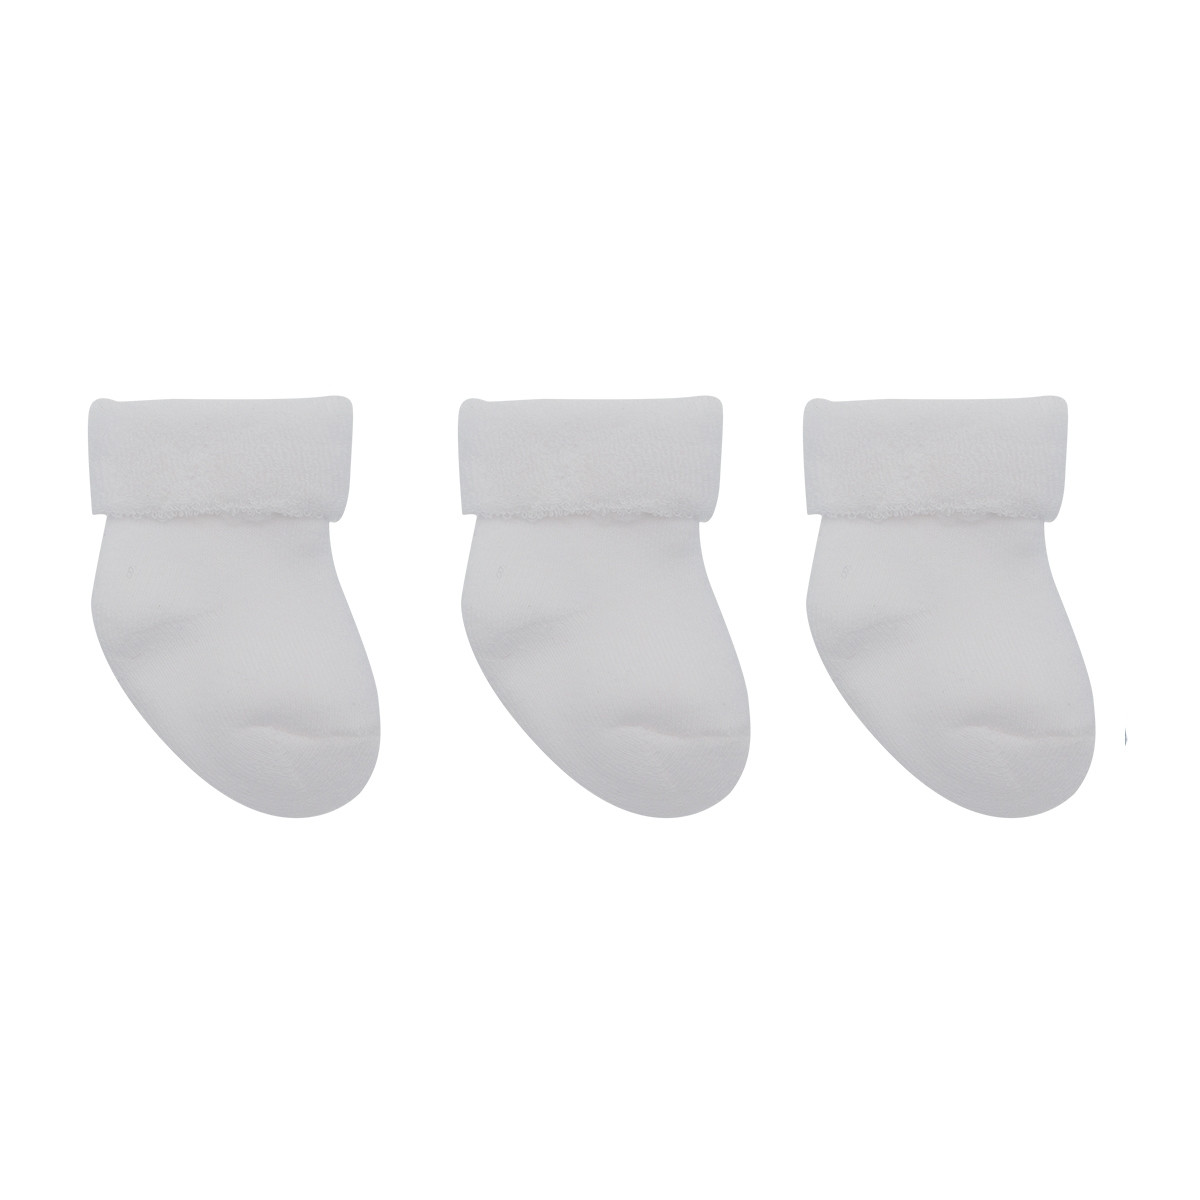 SET 3 SOCKS FOR BABY LISO WHITE CAMBRASS - 1